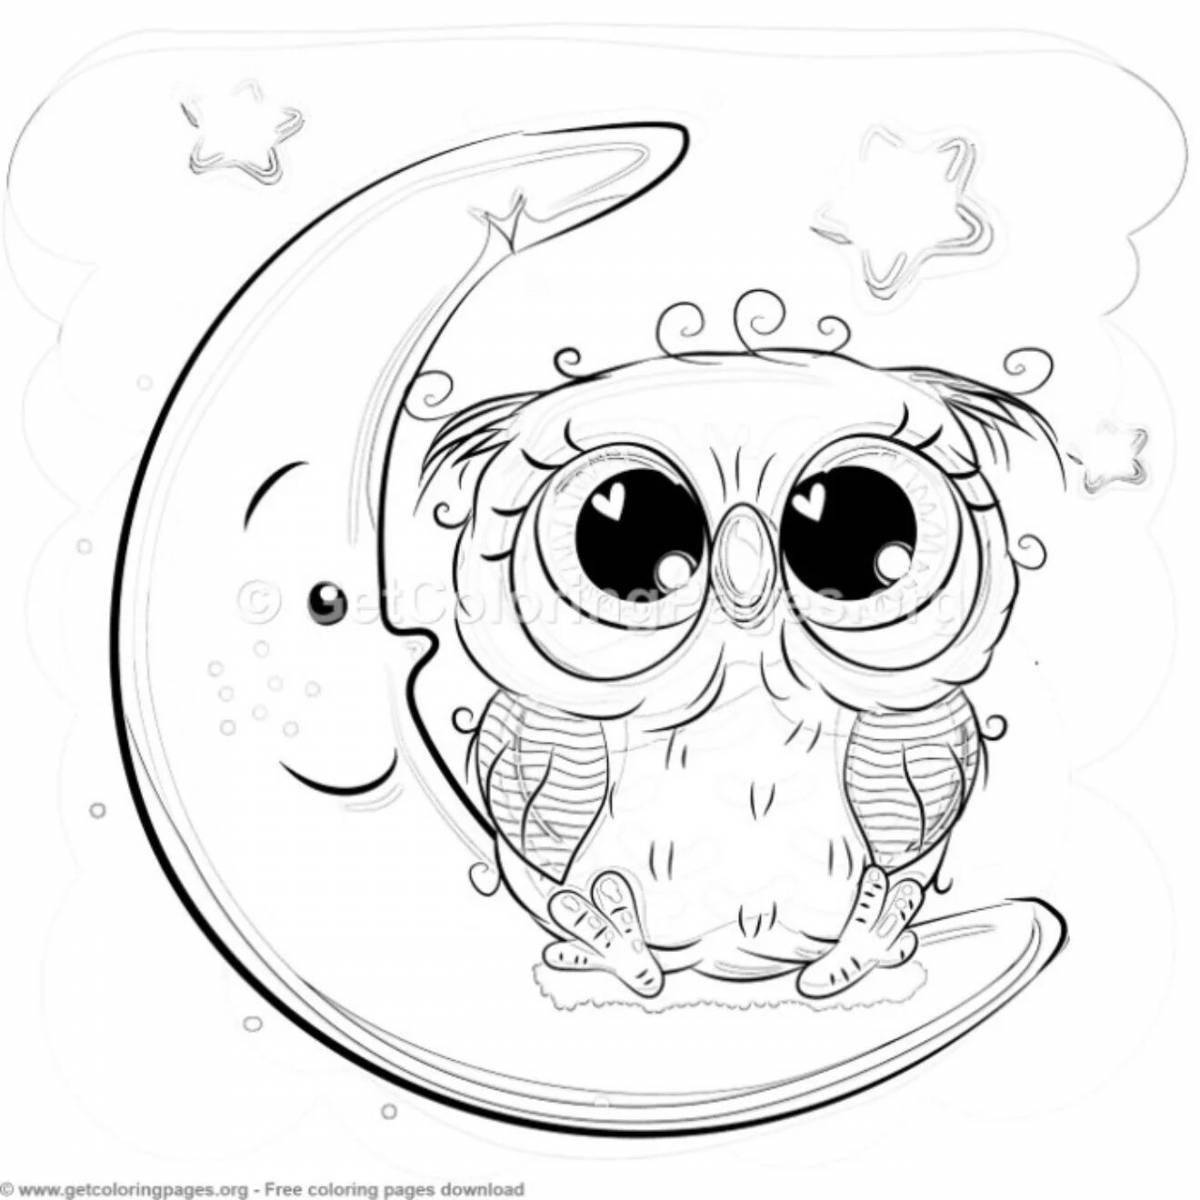 Bright owlet hip hop coloring page